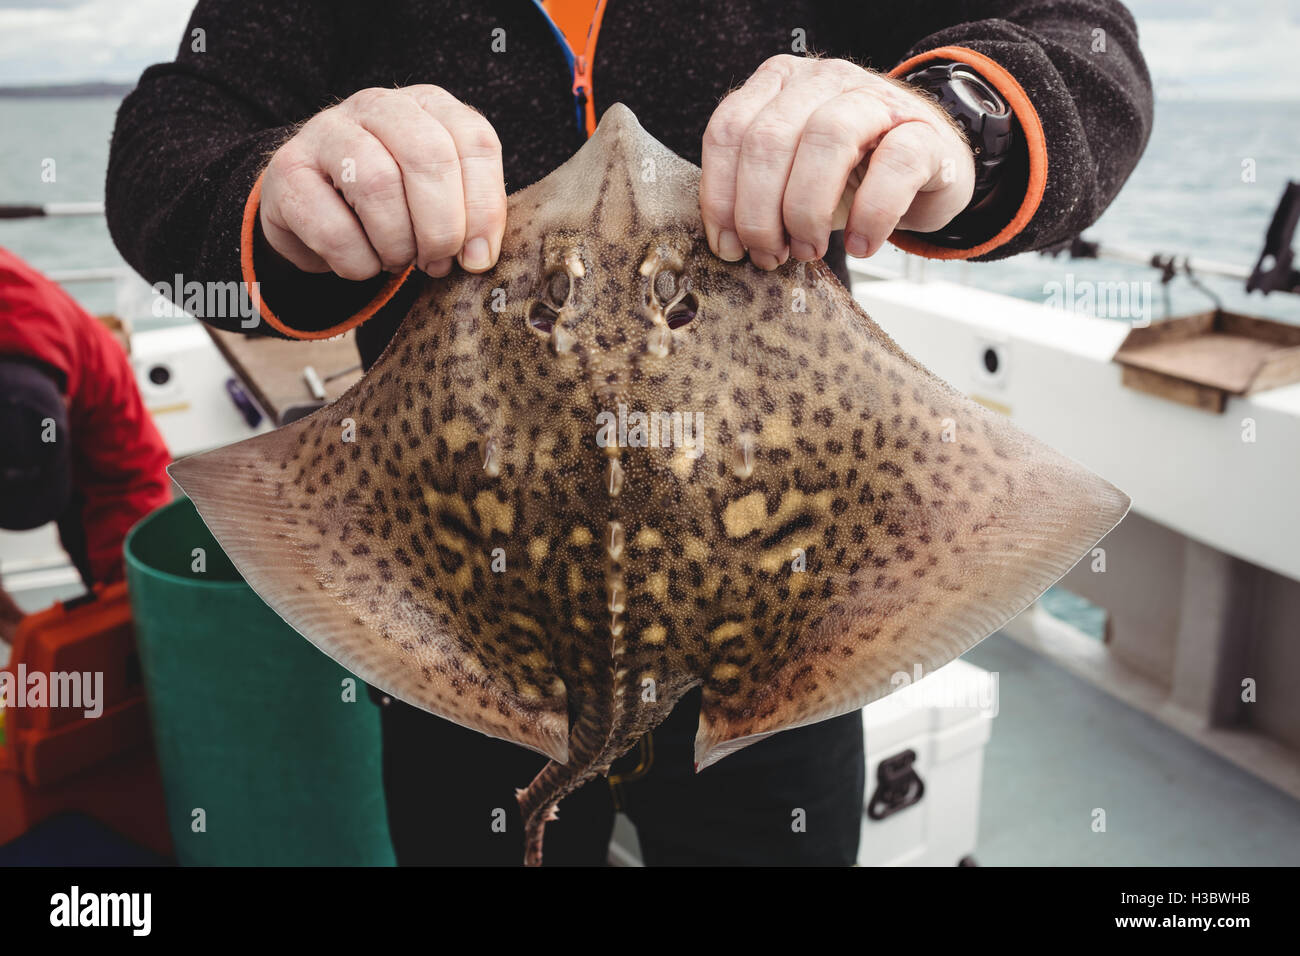 Fisherman holding a ray fish on boat Stock Photo